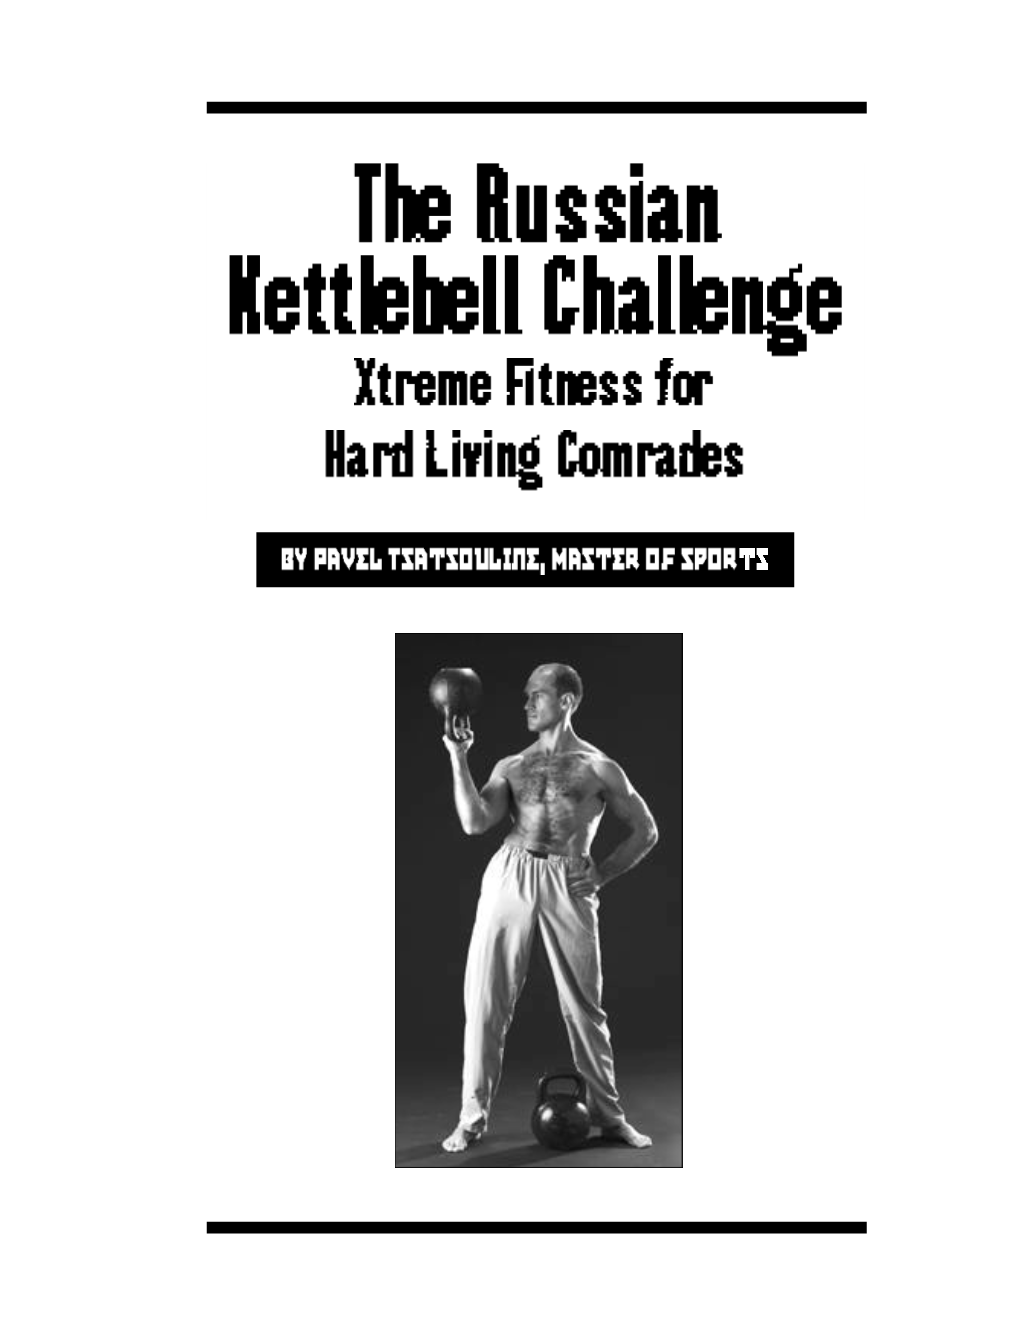 The Russian Kettlebell Challenge Xtreme